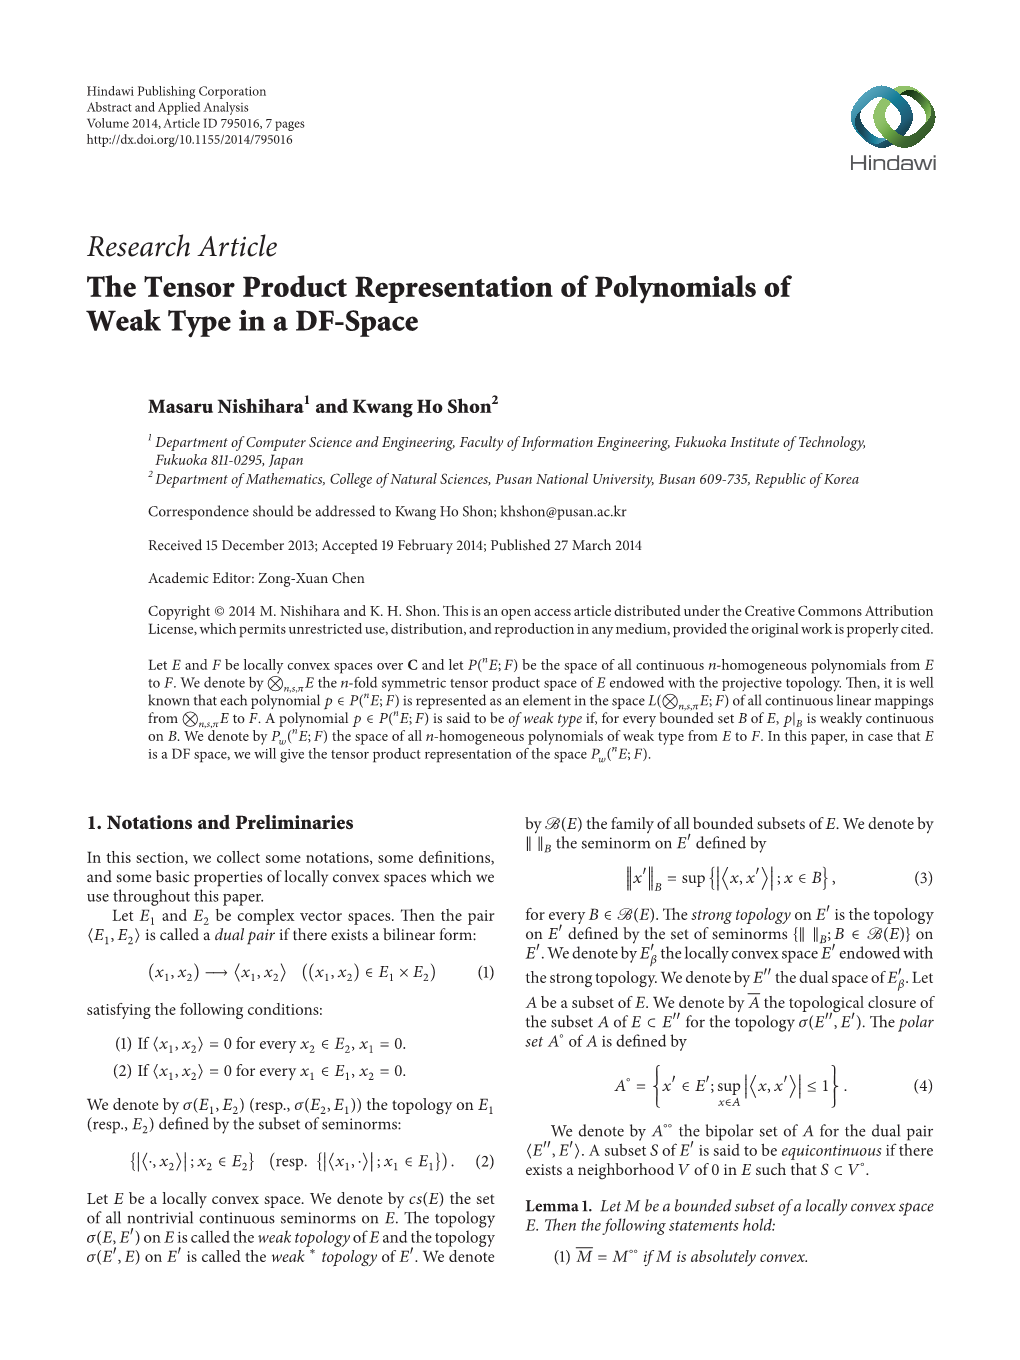 The Tensor Product Representation of Polynomials of Weak Type in a DF-Space